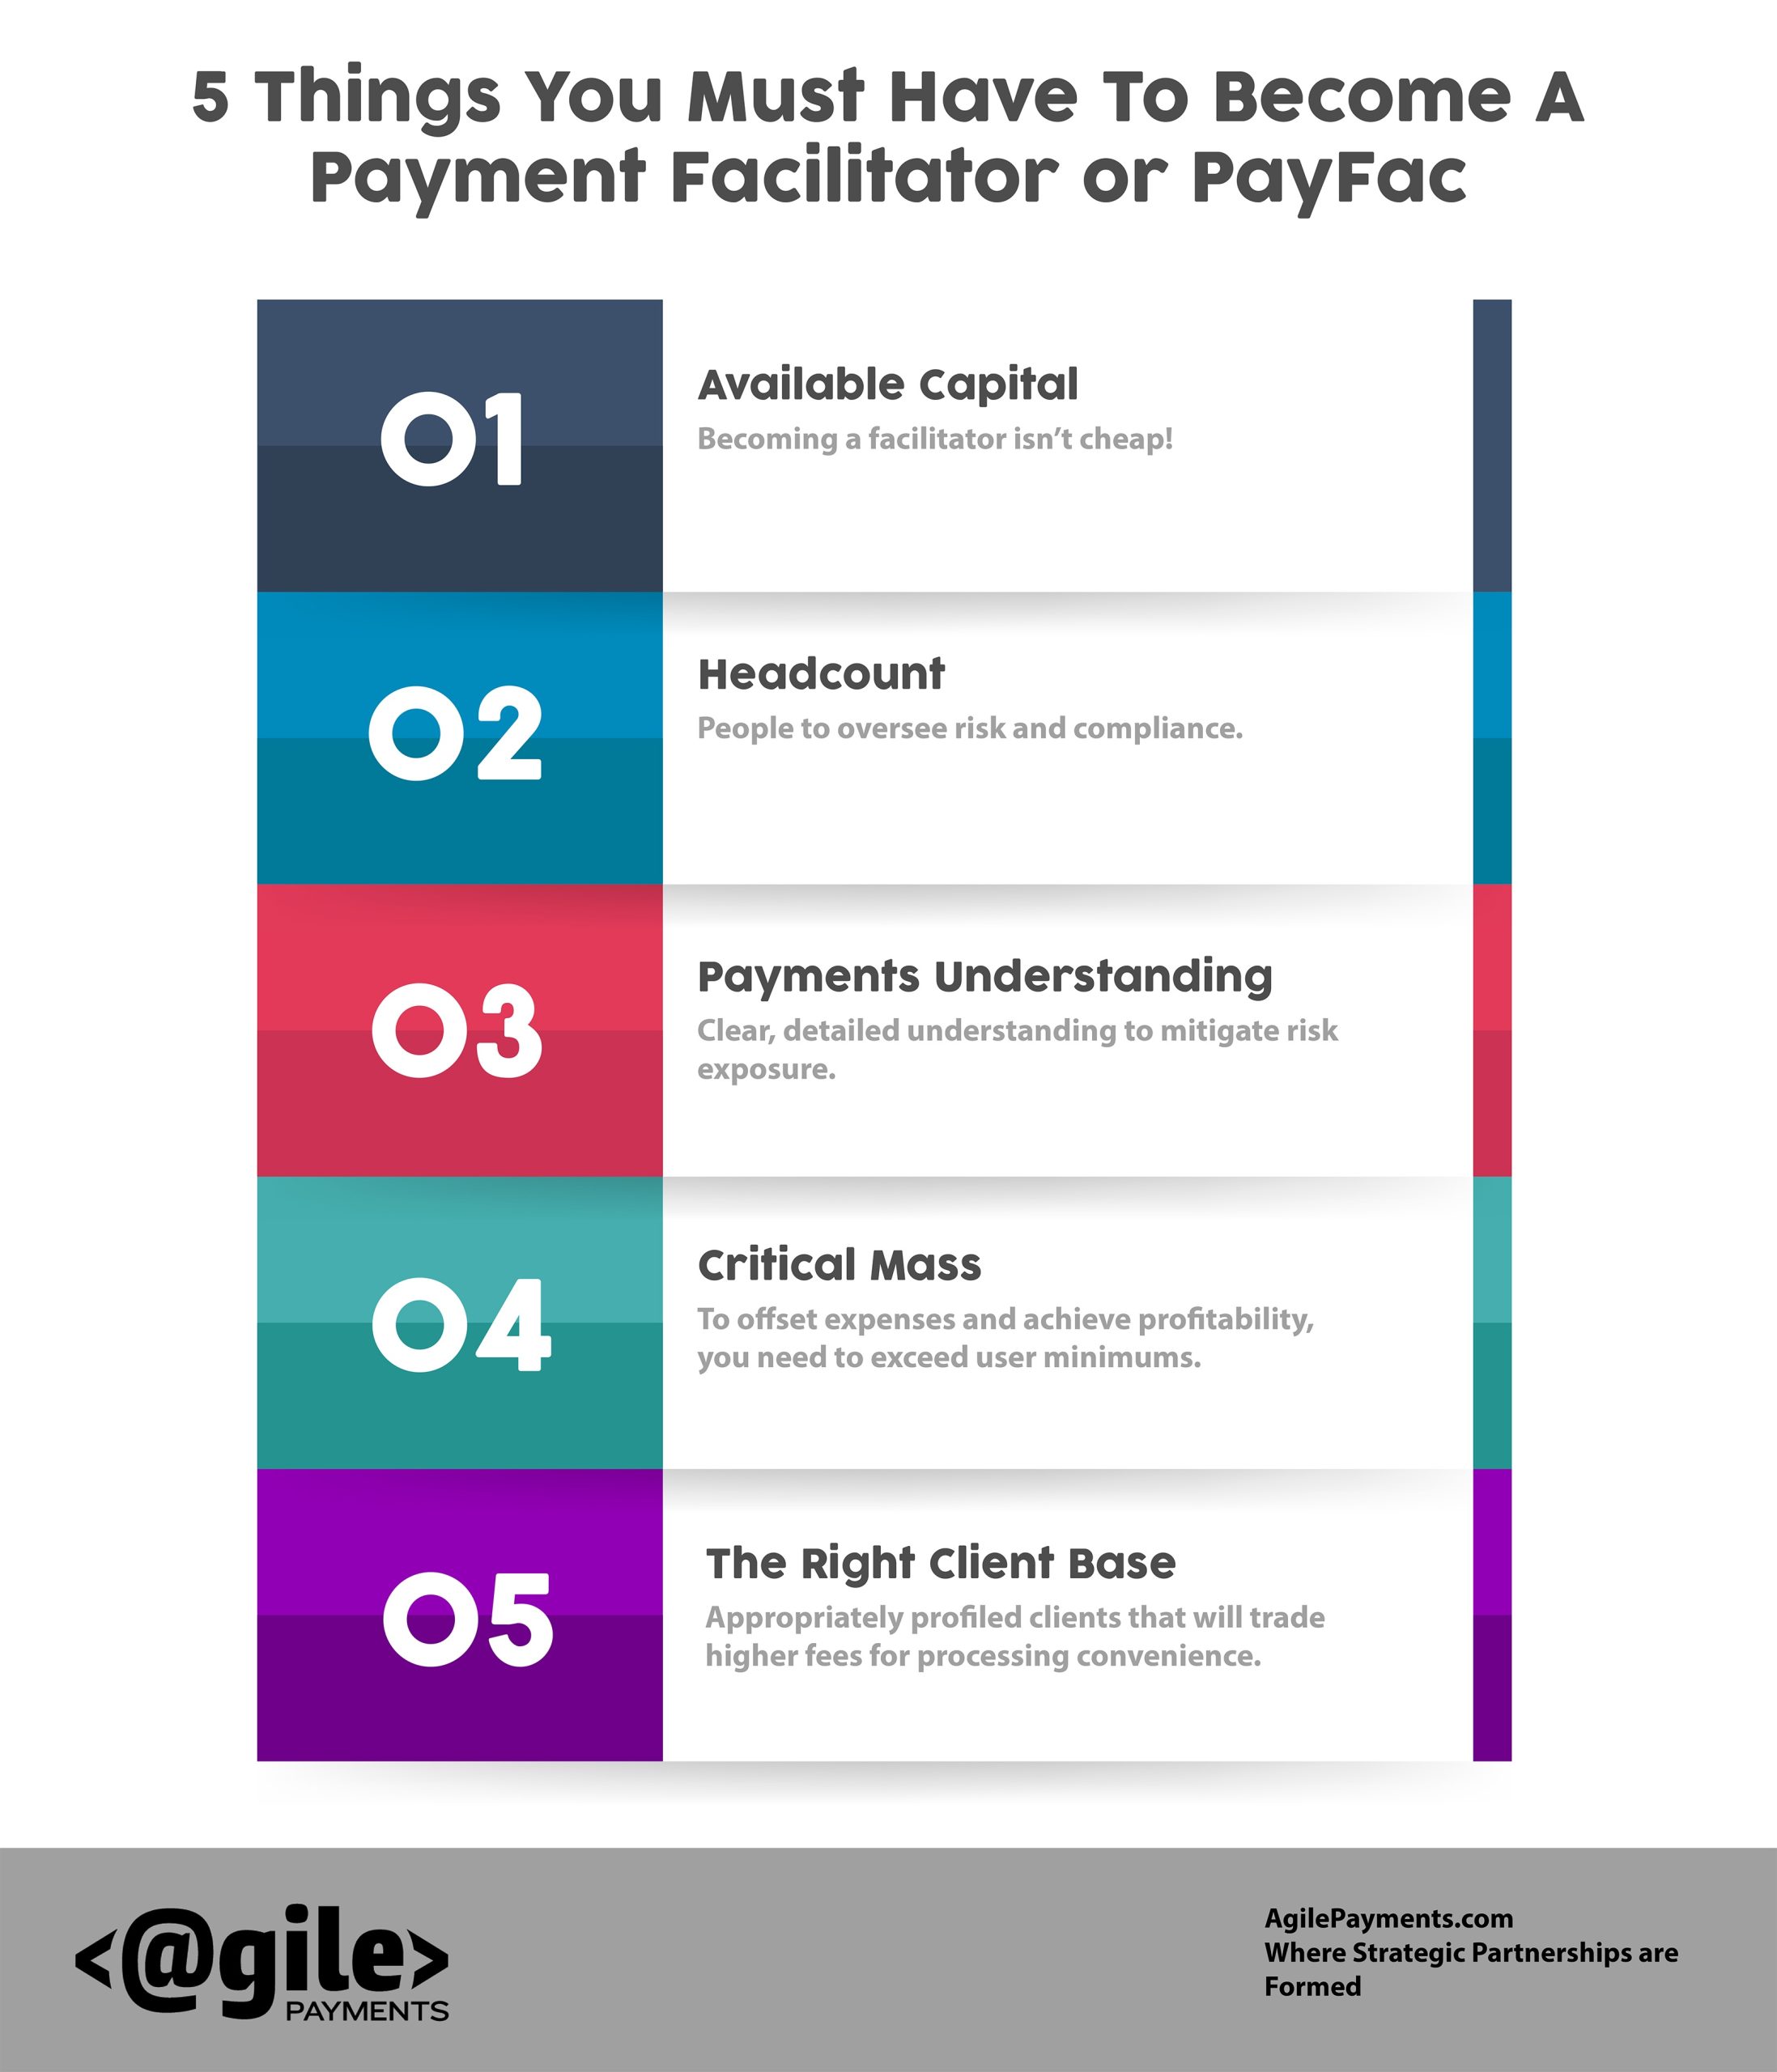 5_Things_You_Need_to_Become_a_Payment_Facilitator (1)